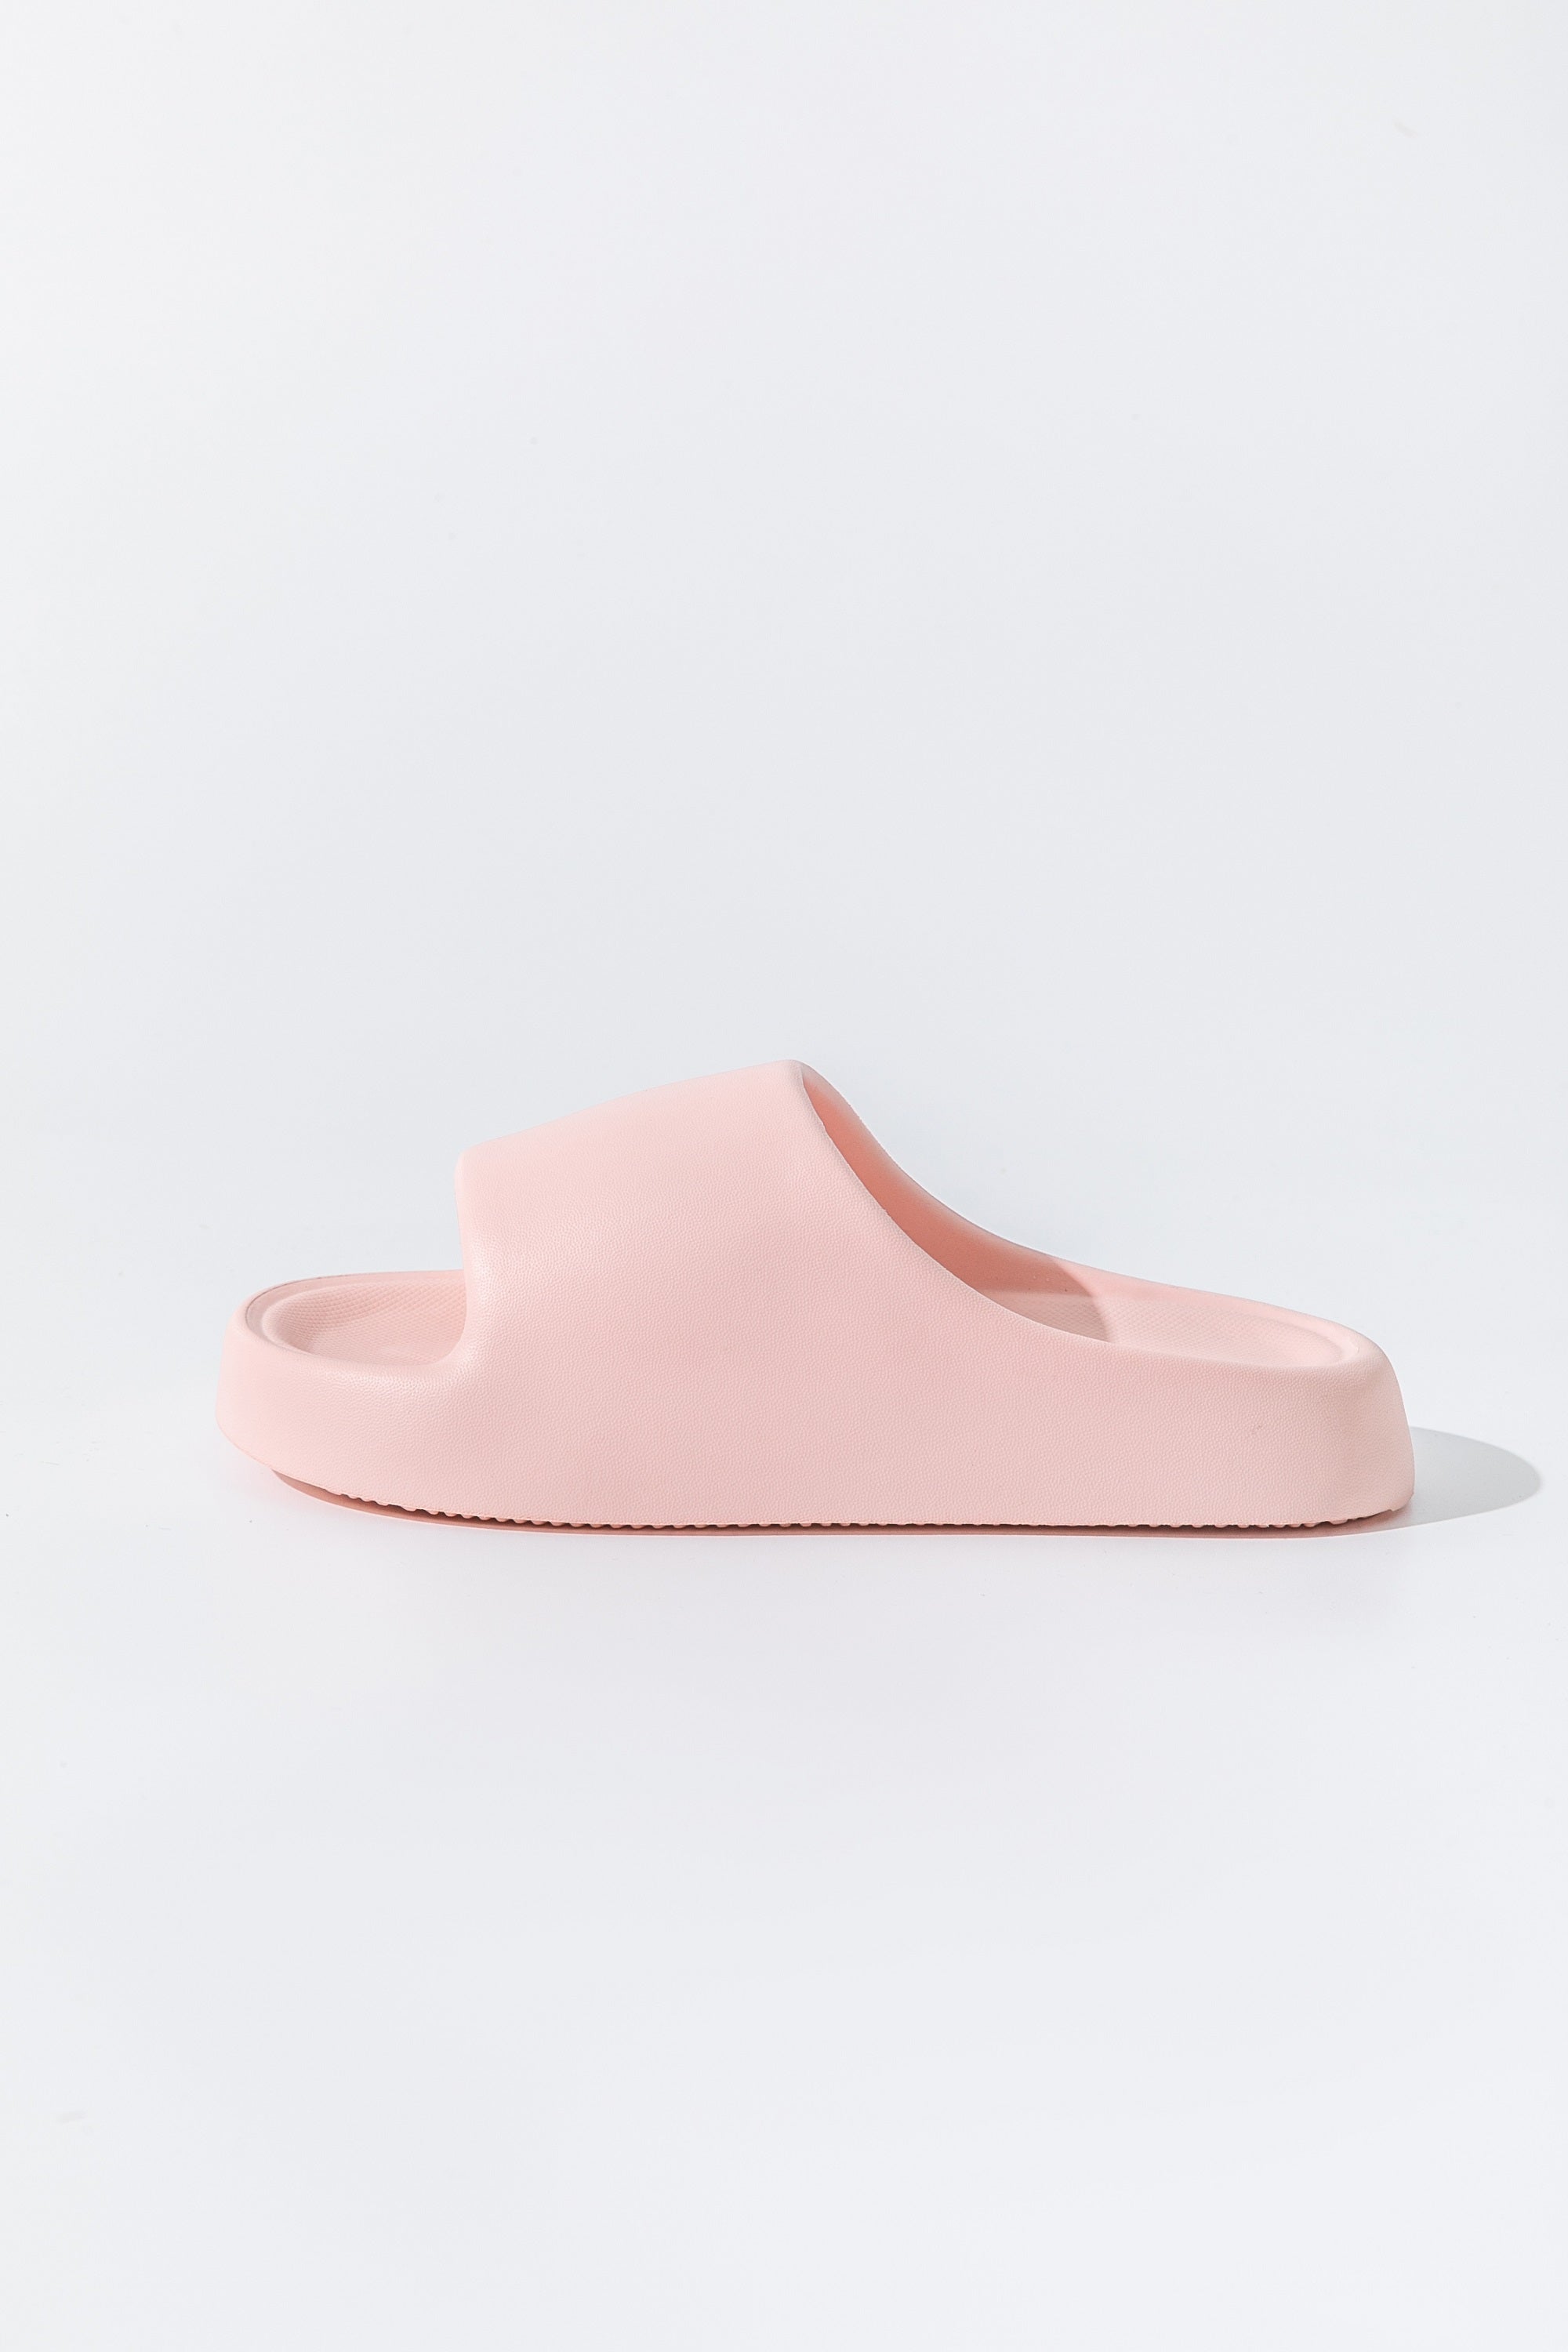 MINISO Q-STRUCT SERIES WOMEN'S FASHION SLIPPERS(PINK,39-40) 2015063812109 FASHIONABLE SLIPPERS